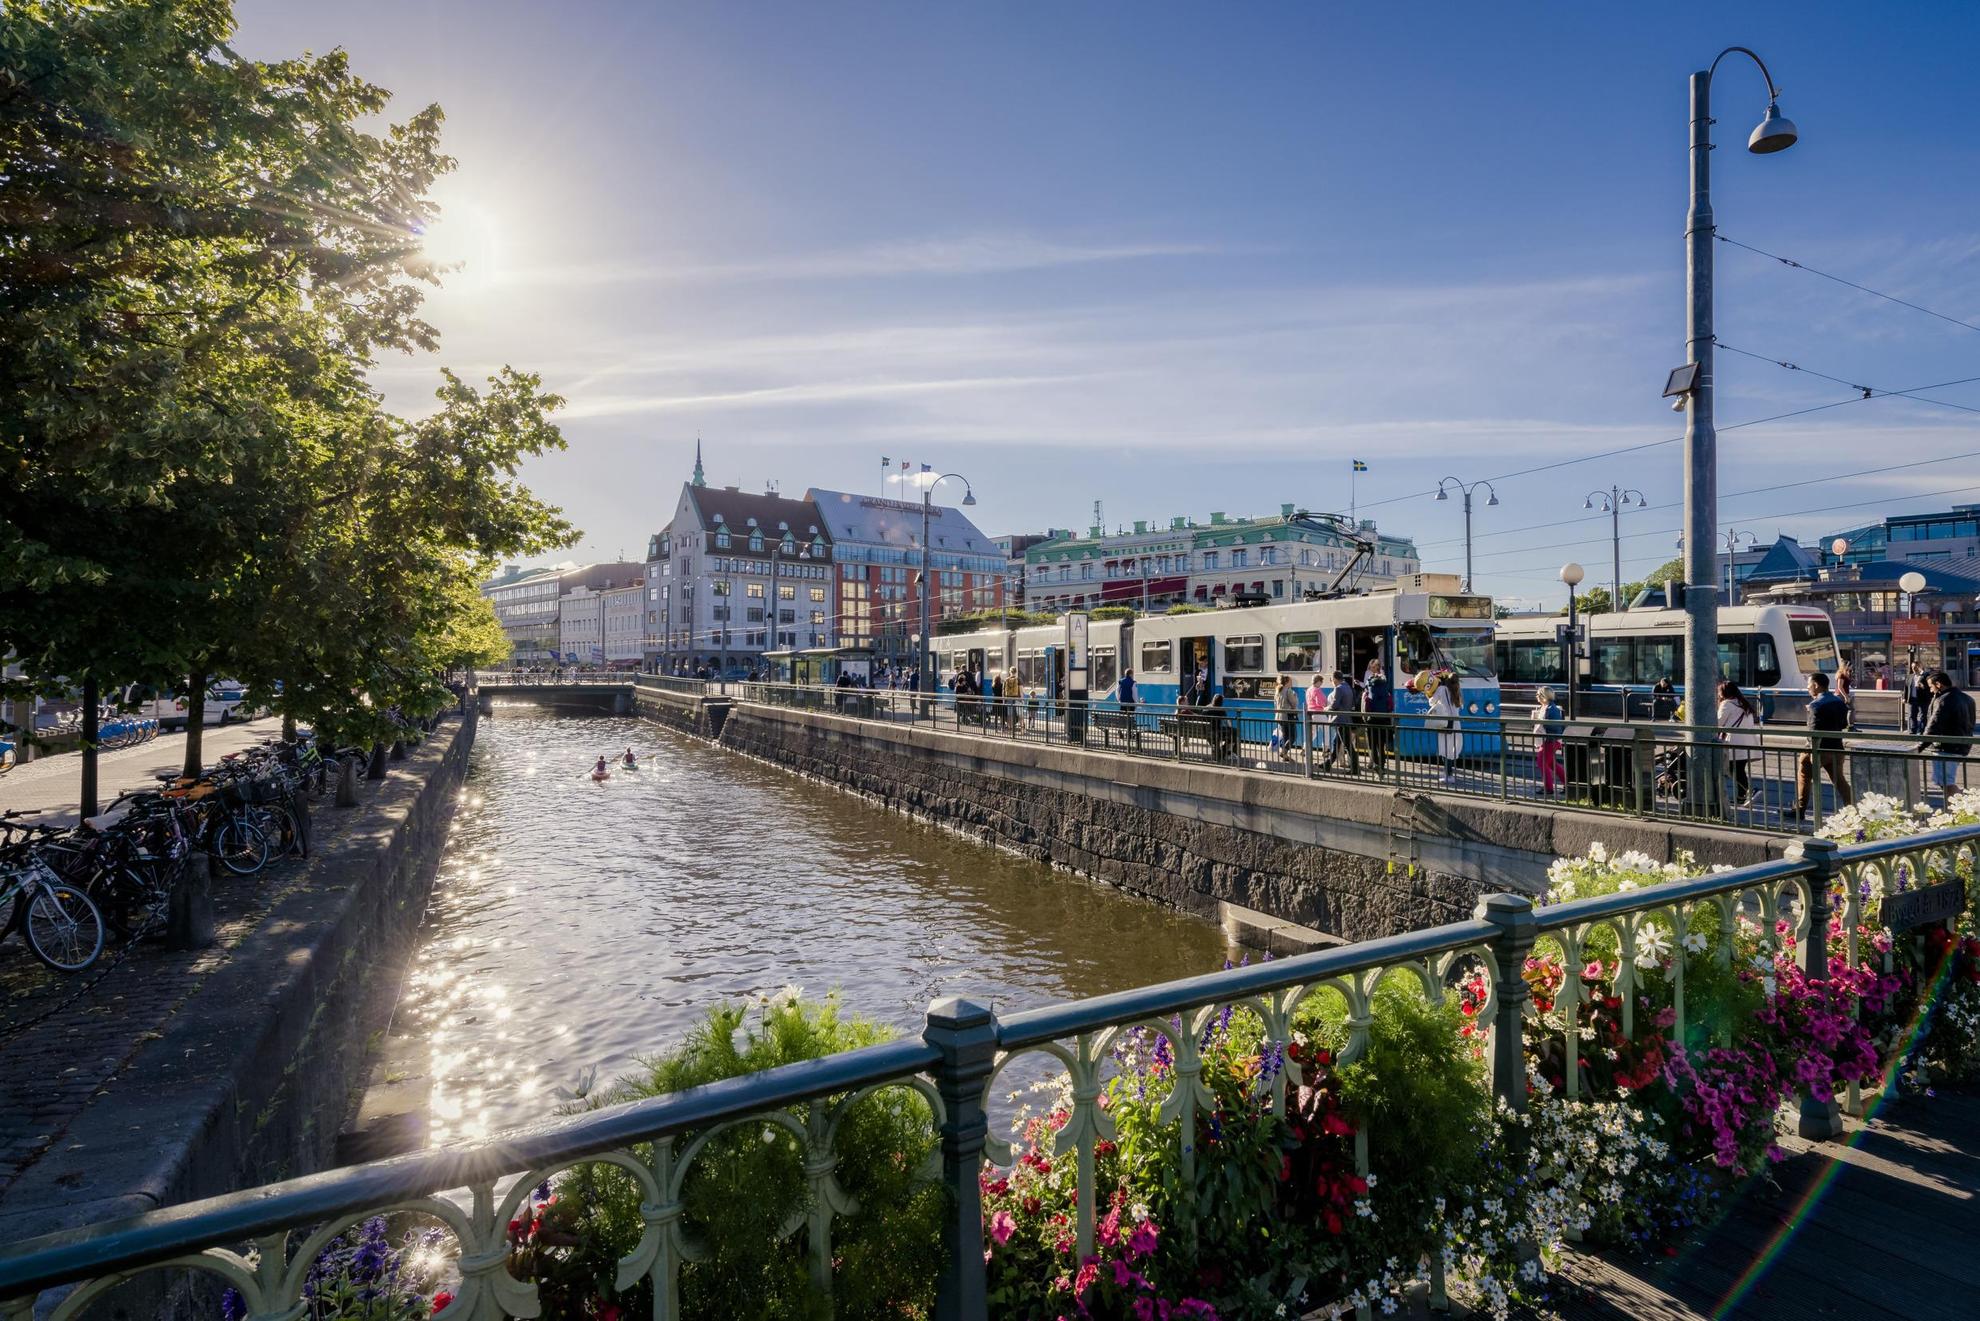 Trams by the canal and houses of Gothenburg. Flowers and trees surrounding the canal, and two kayaks in the water.